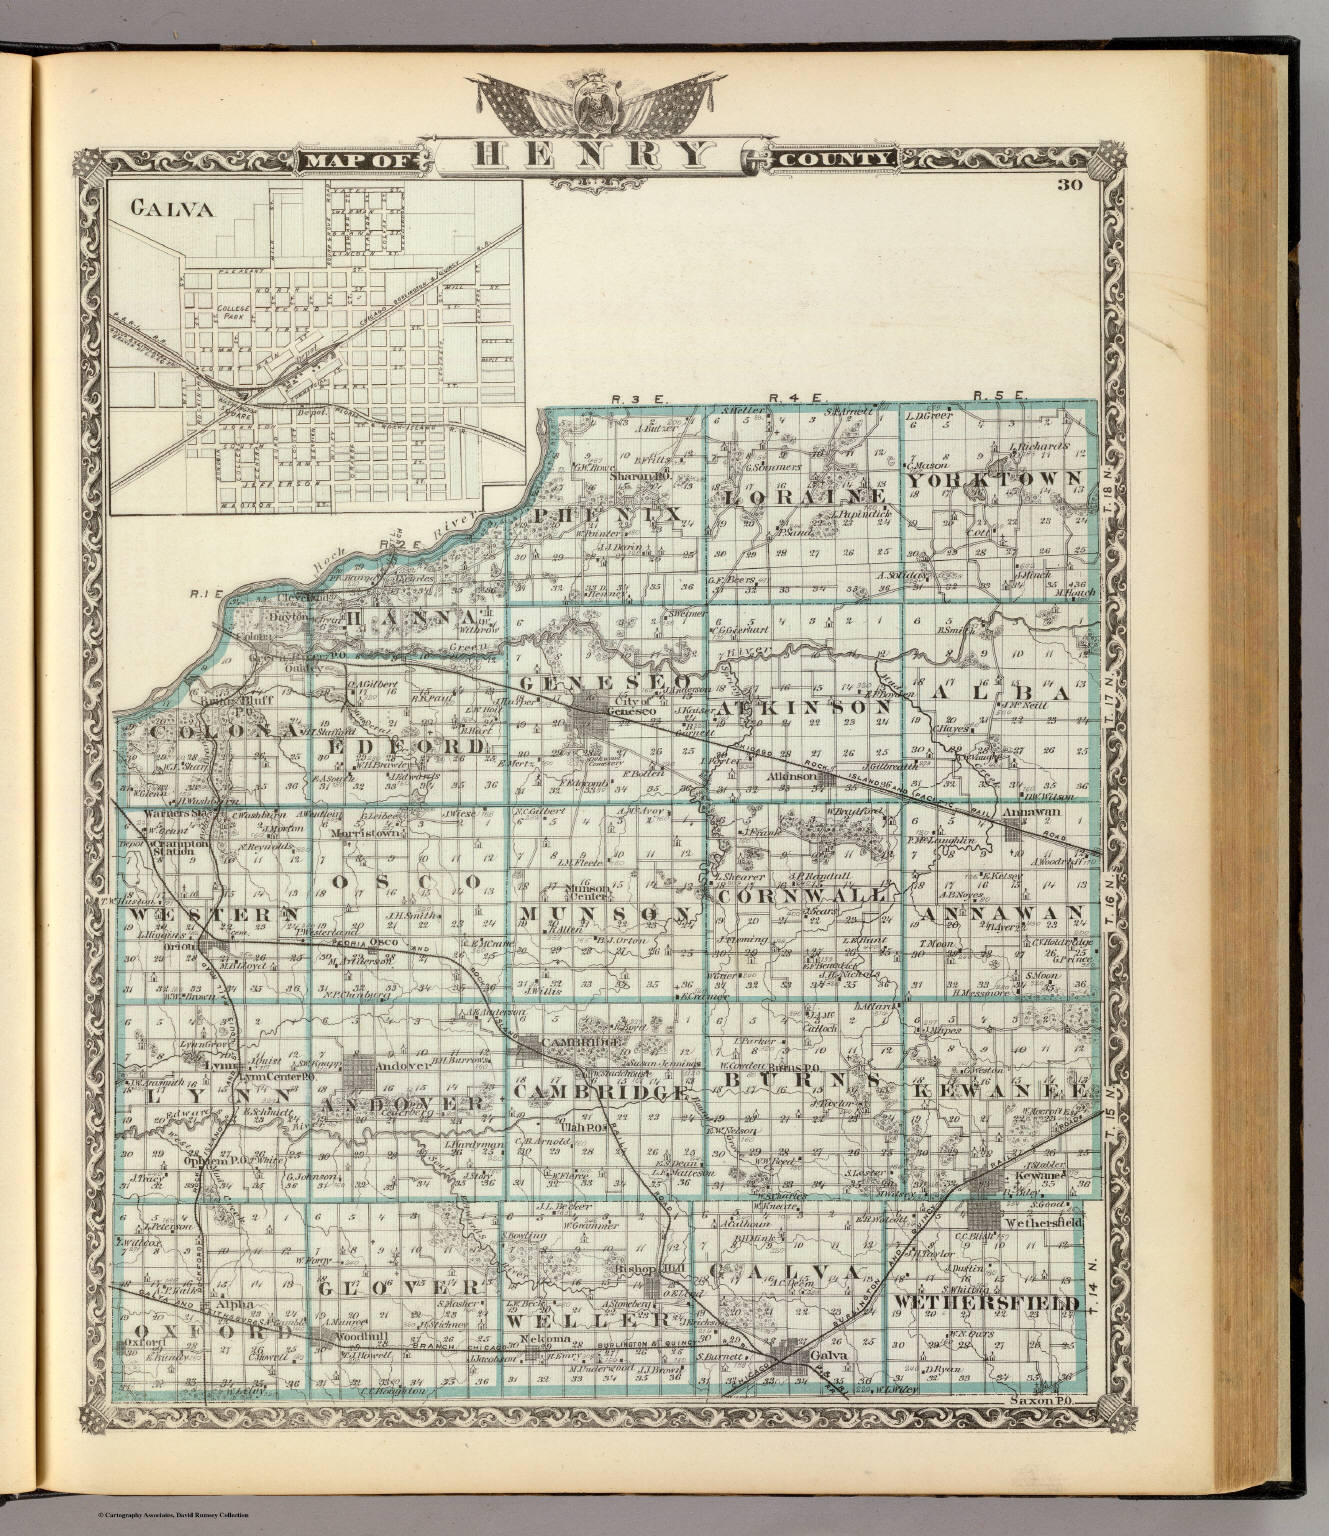 Map of Henry County and Galva. David Rumsey Historical Map Collection